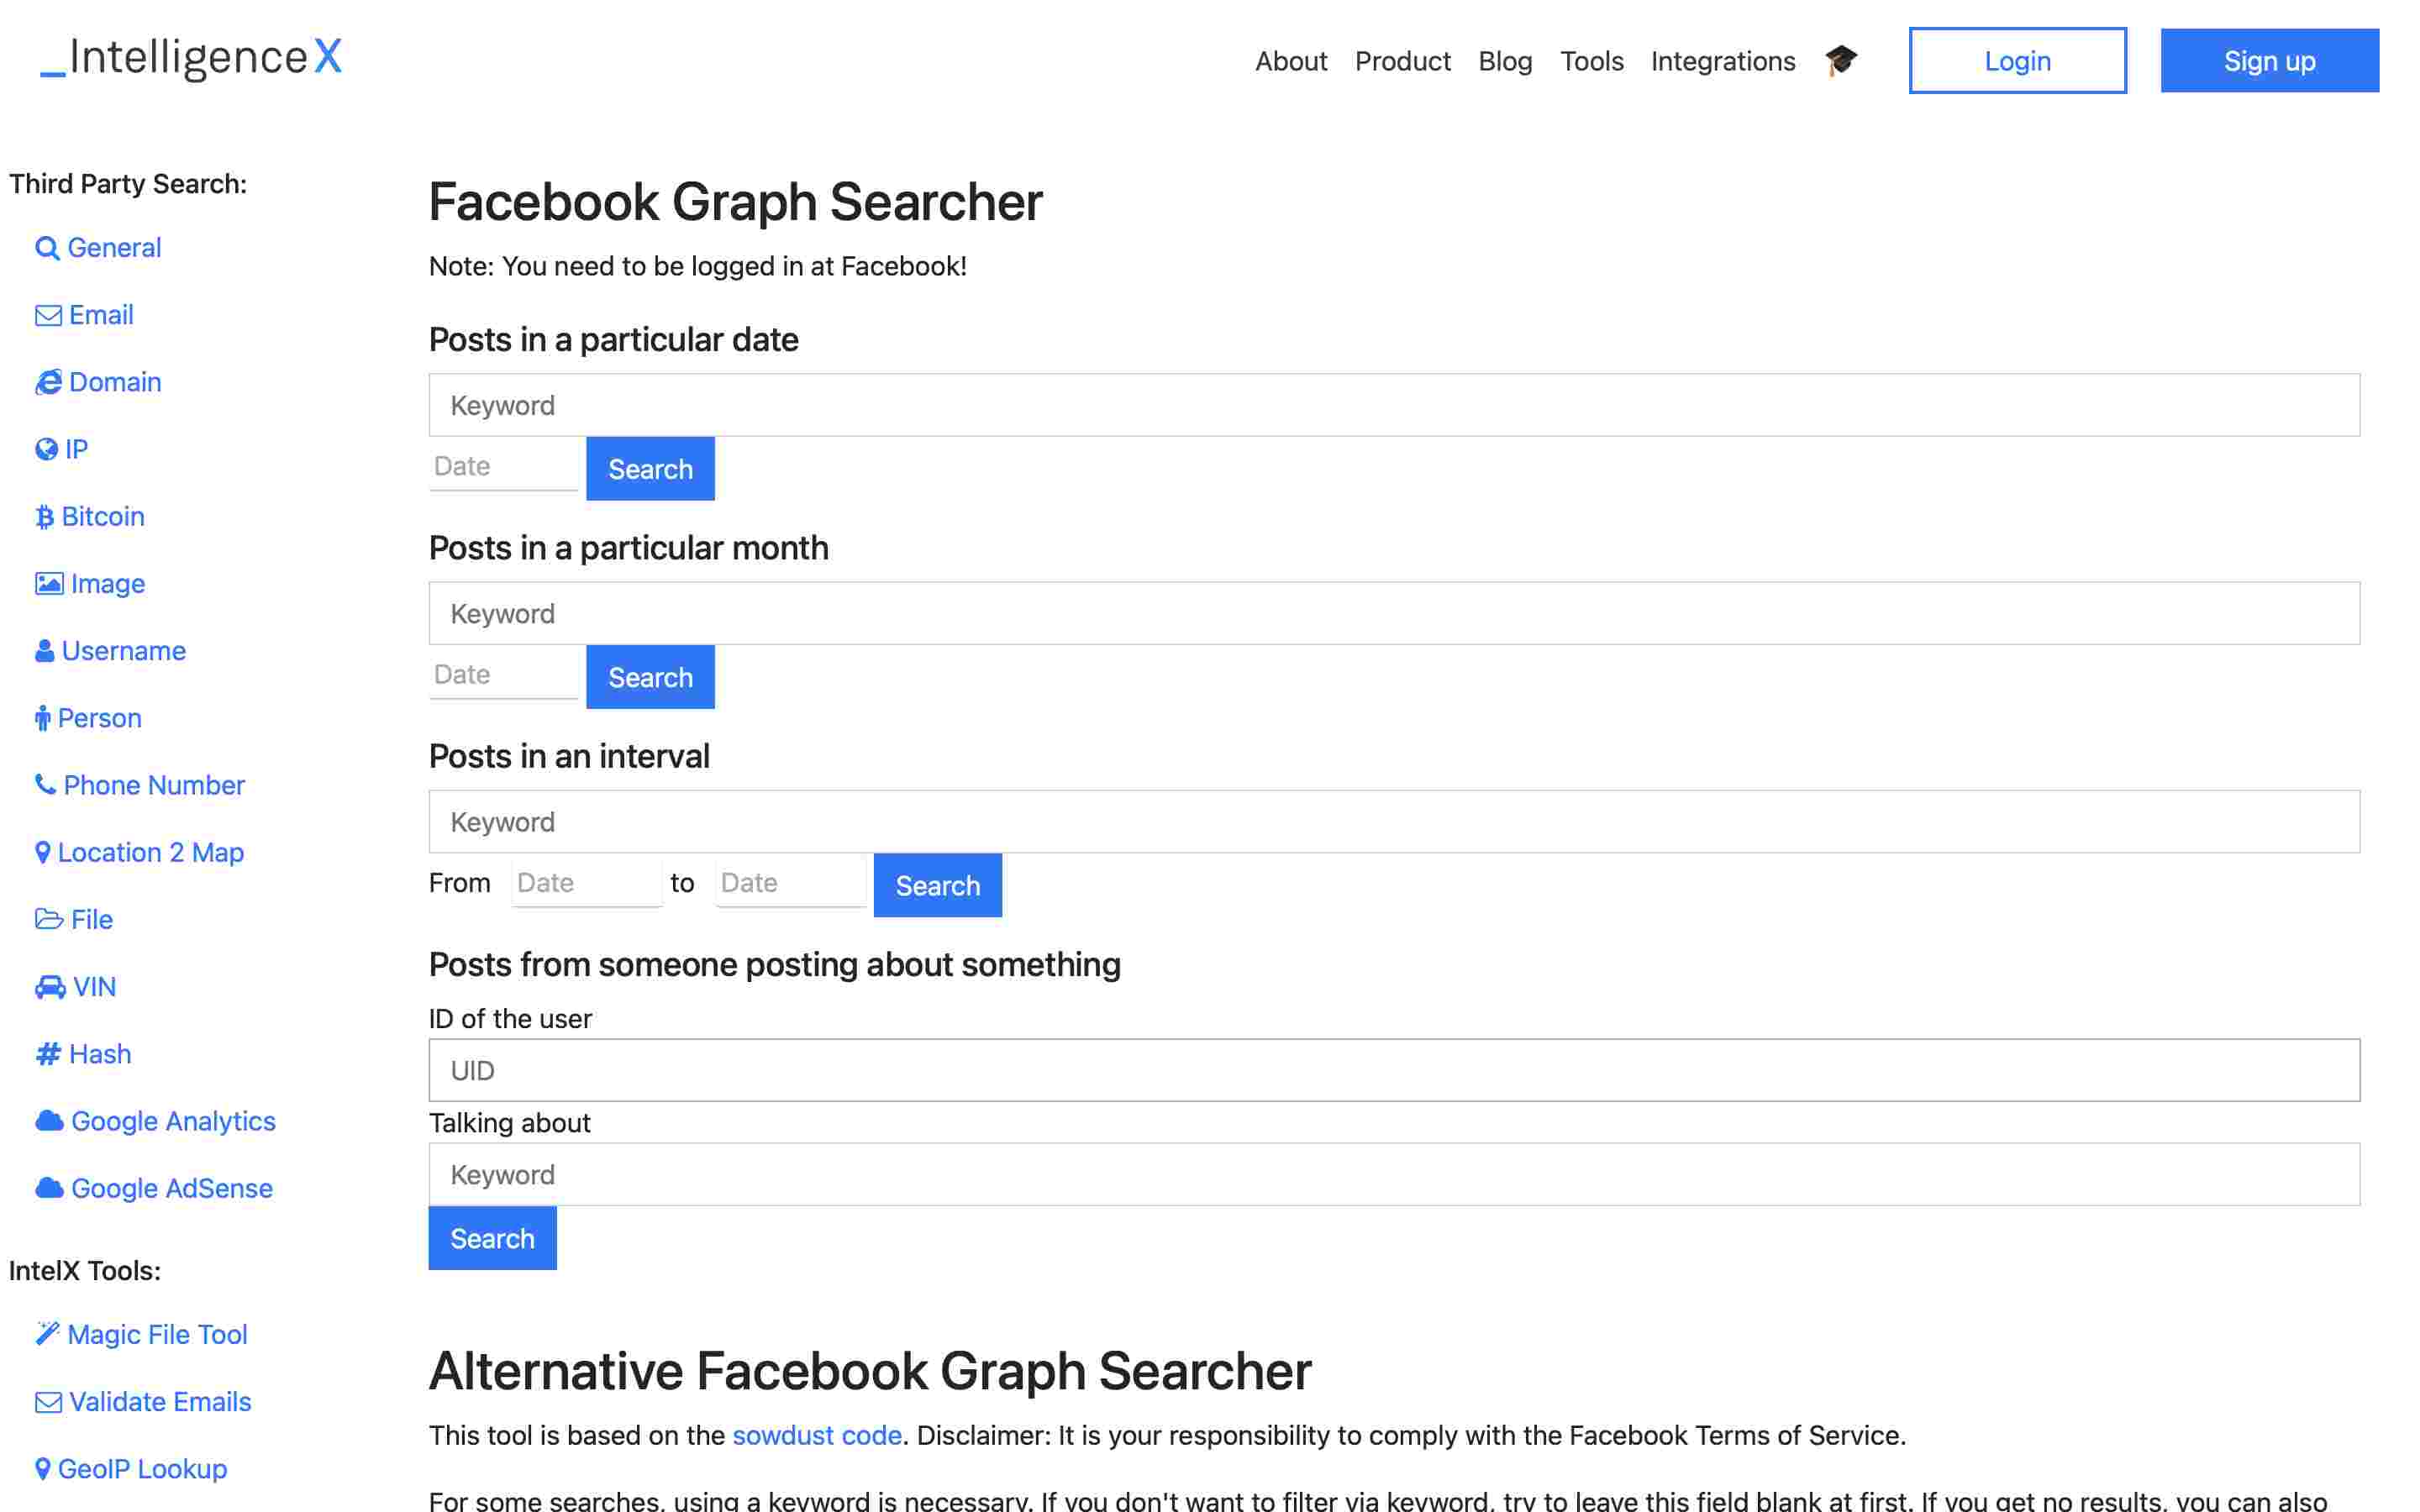 IntelligenceX Facebook Search tools